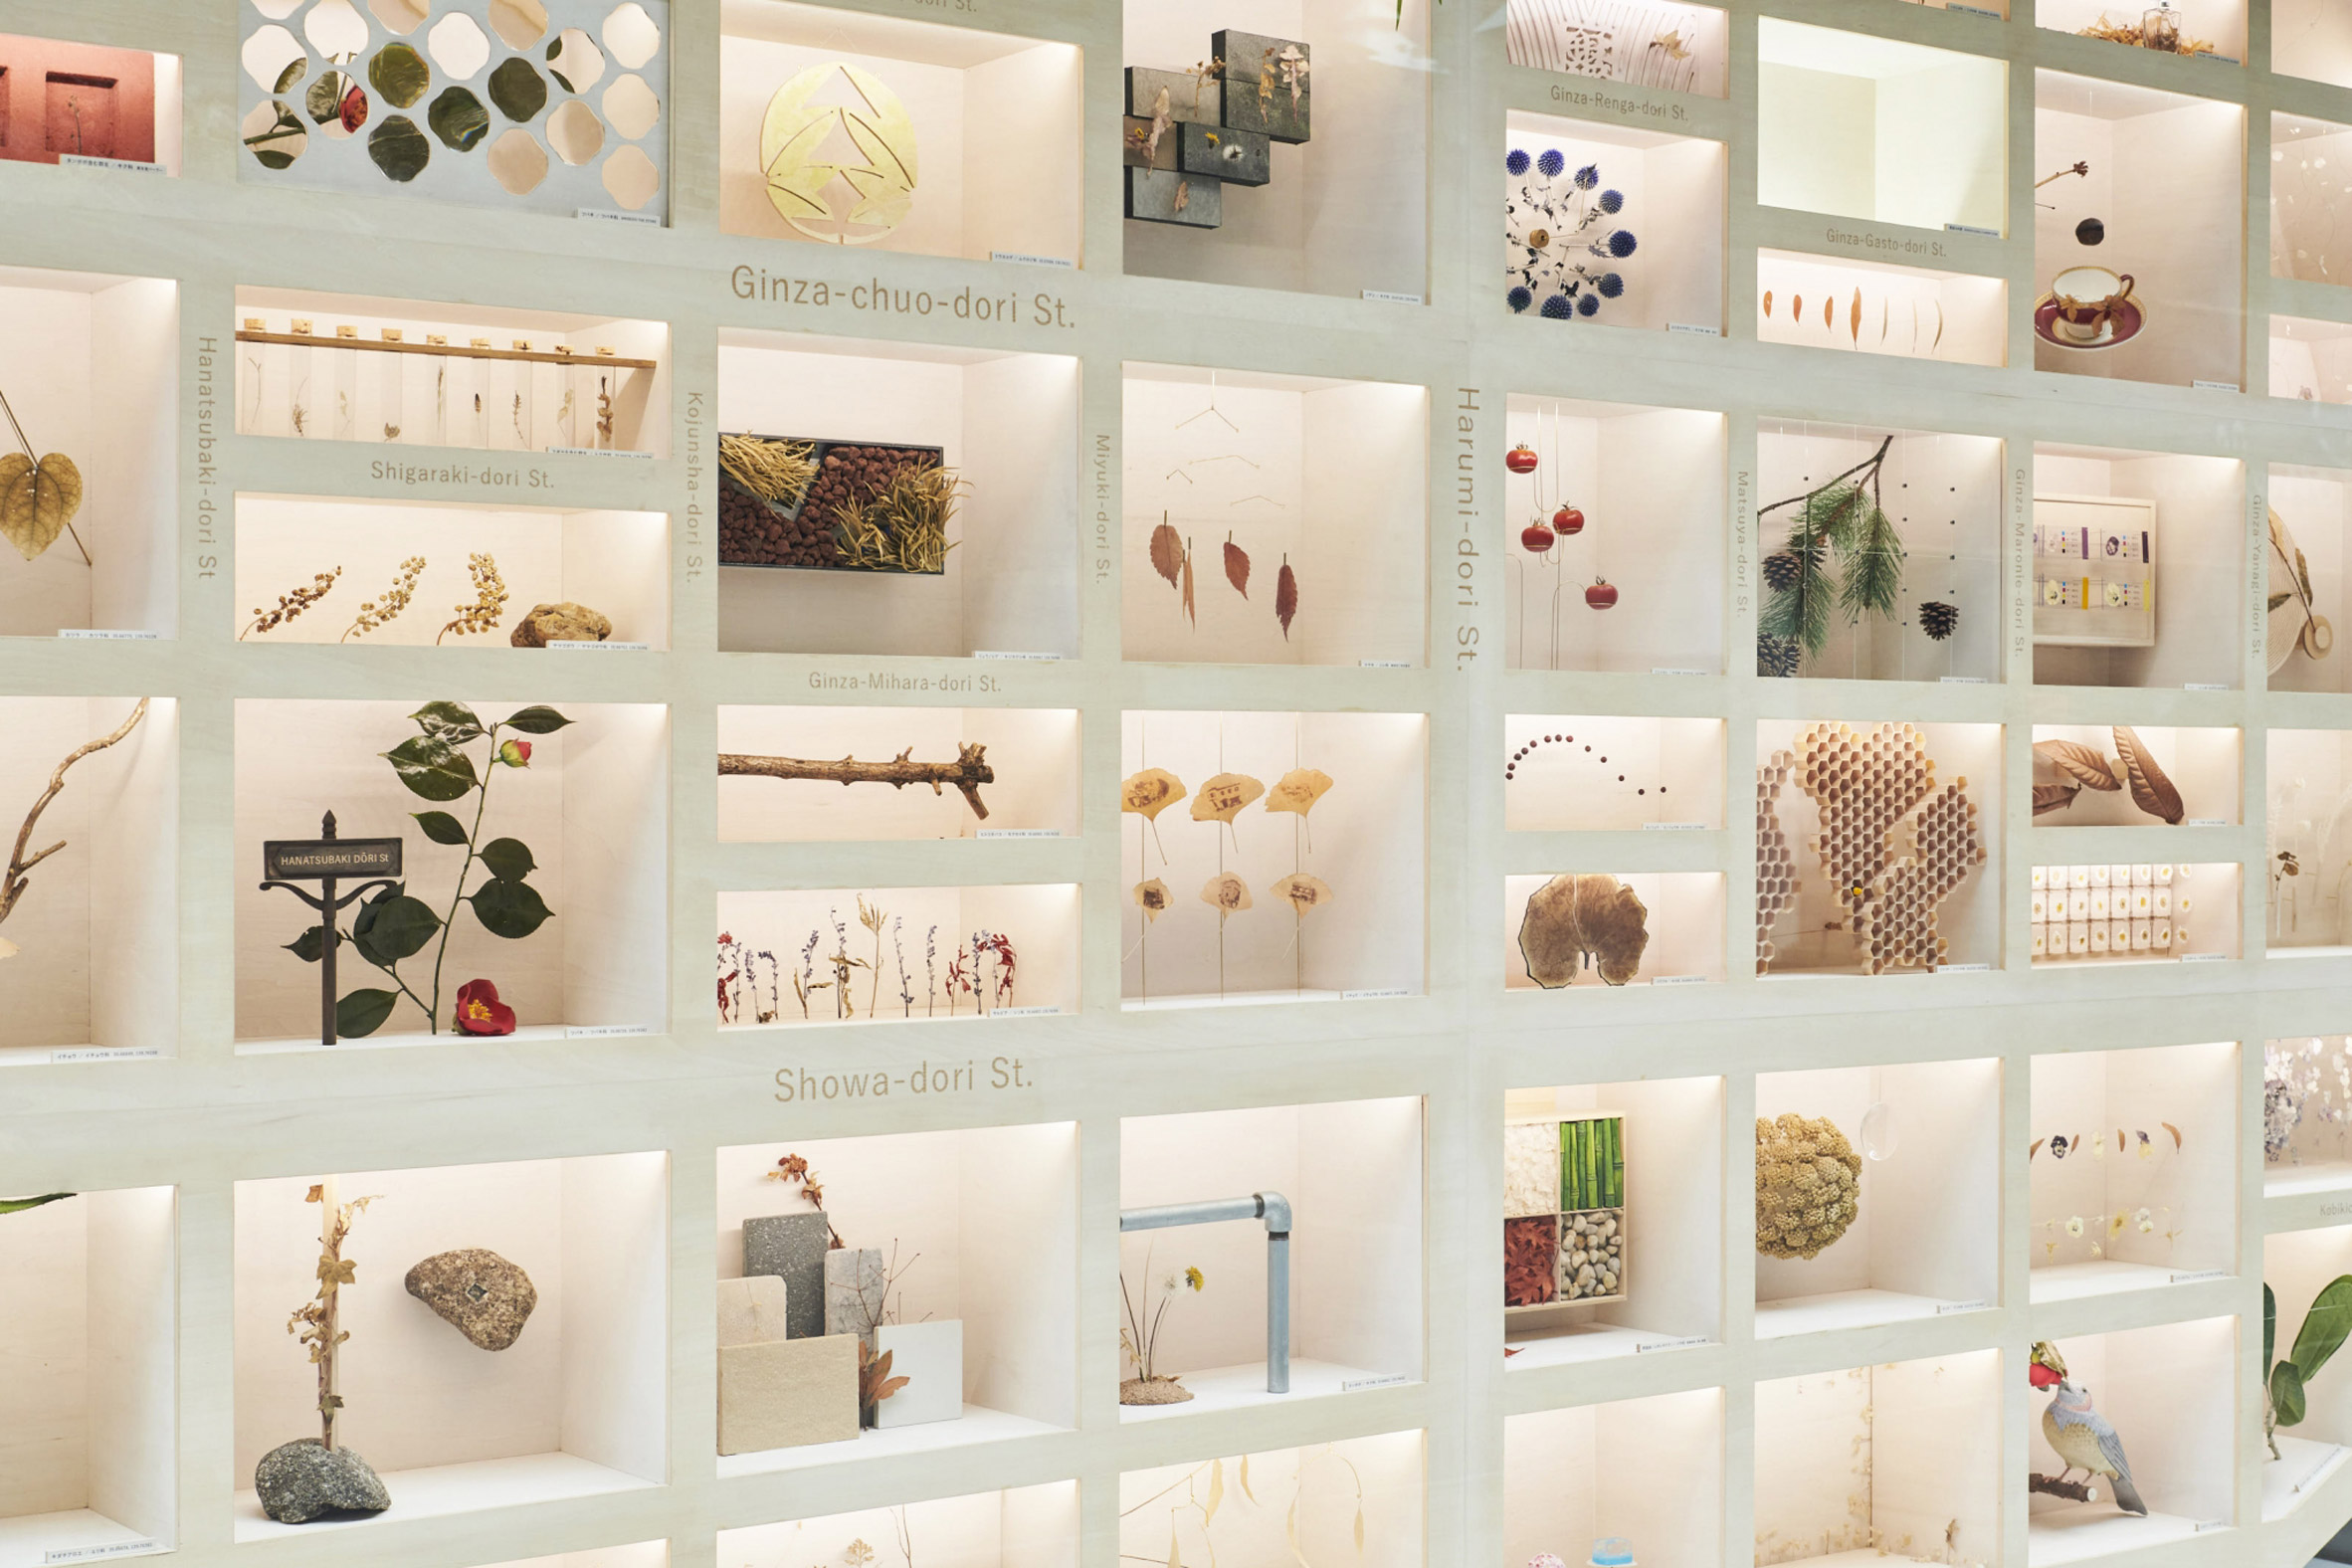 A number of specimens curated in 72 windows 